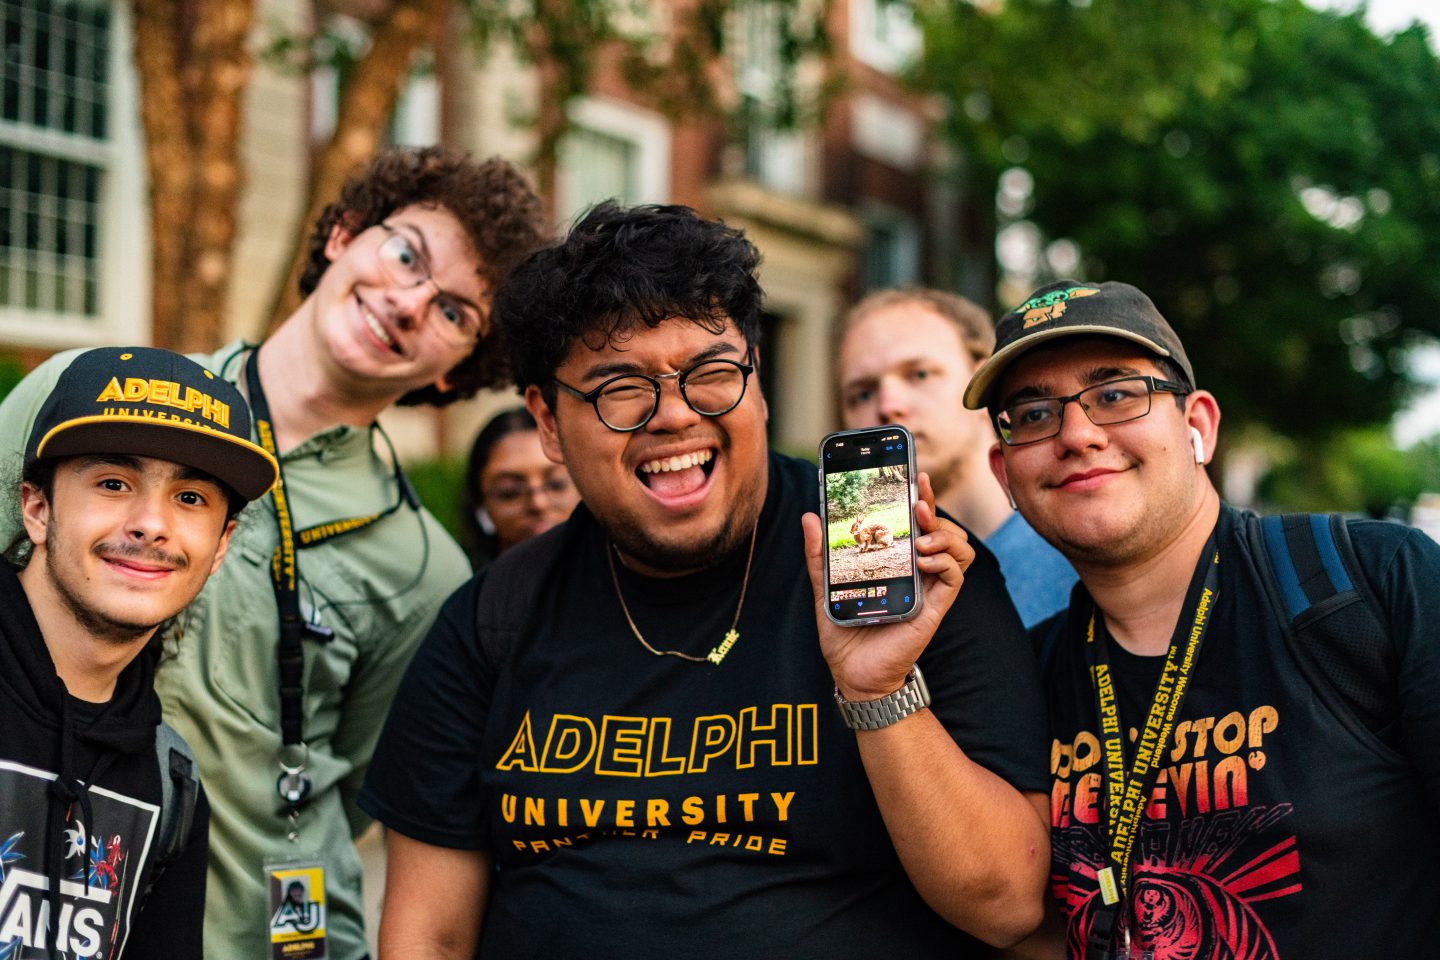 Four smiling young adults are grouped together, one holding a smartphone displaying a photo of an Adelphi campus bunny; they wear Adelphi University-branded apparel, suggesting a sense of school spirit at an on-campus event.